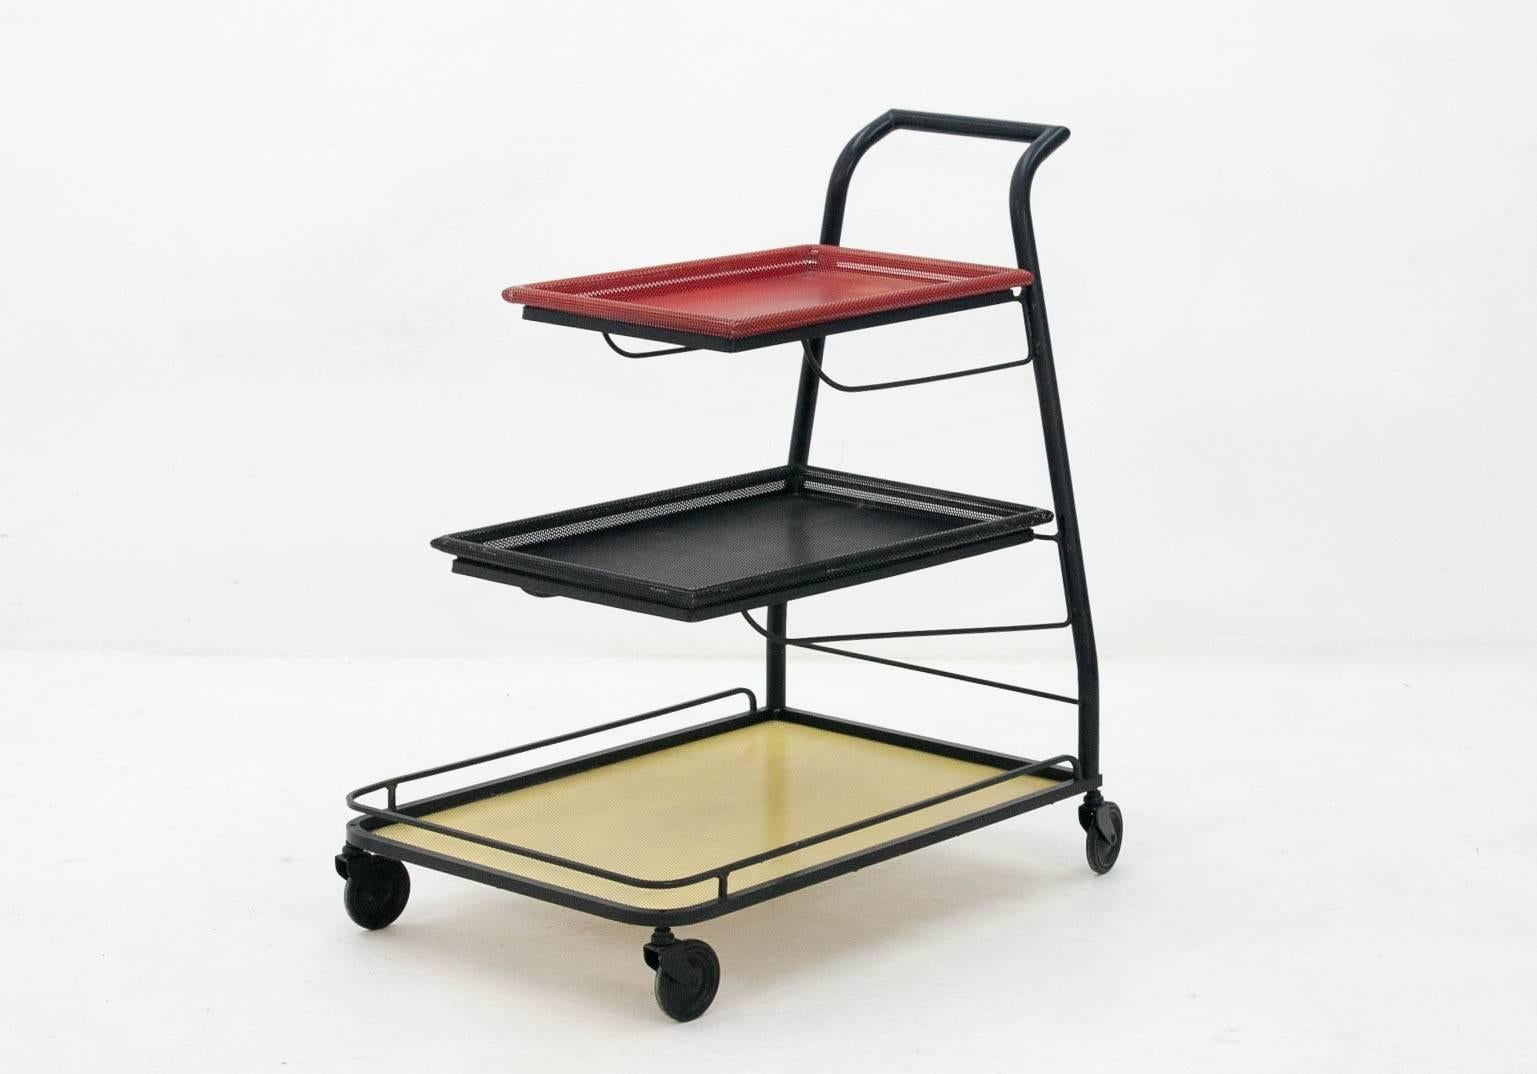 Iconic  and rare Mathieu Matégot  DEMON serving trolley or bar cart. Produced by Artimeta Soest in the 1950s and finished in a striking red/black/yellow color combination. Original colors . A real design by the great Designer . The last photo
is